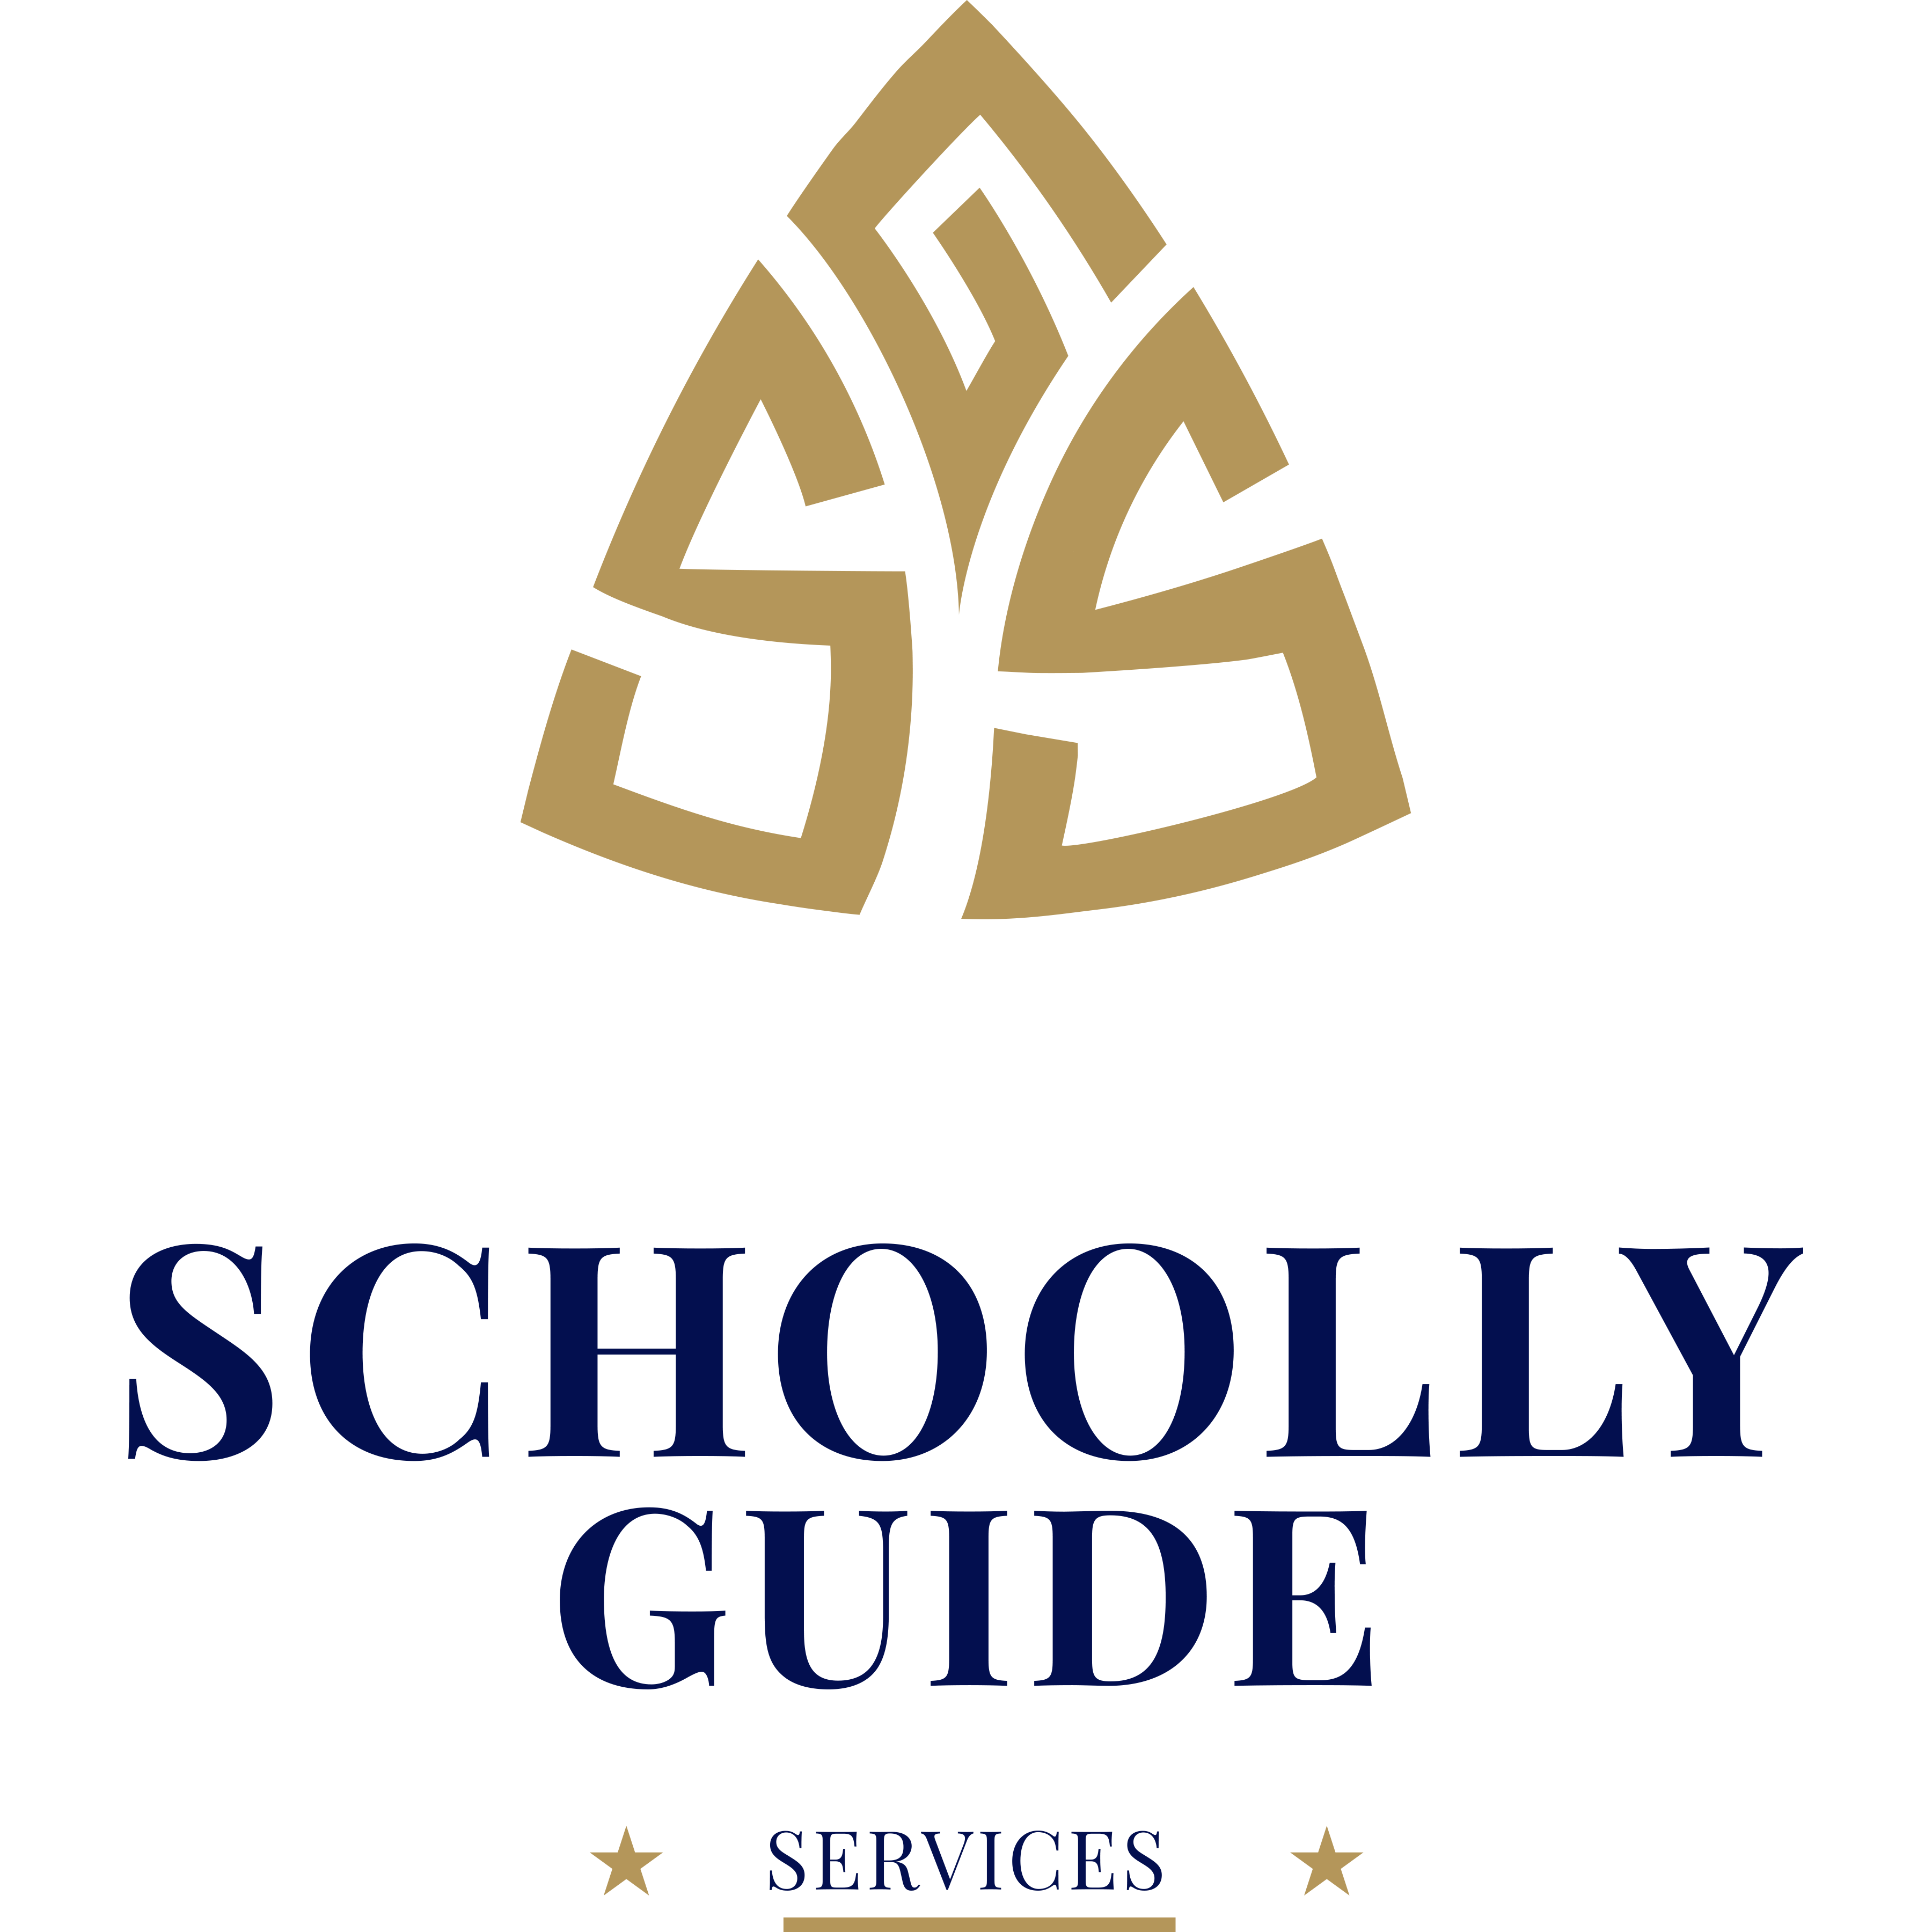 Schoolly guide services pvt ltd's logo image